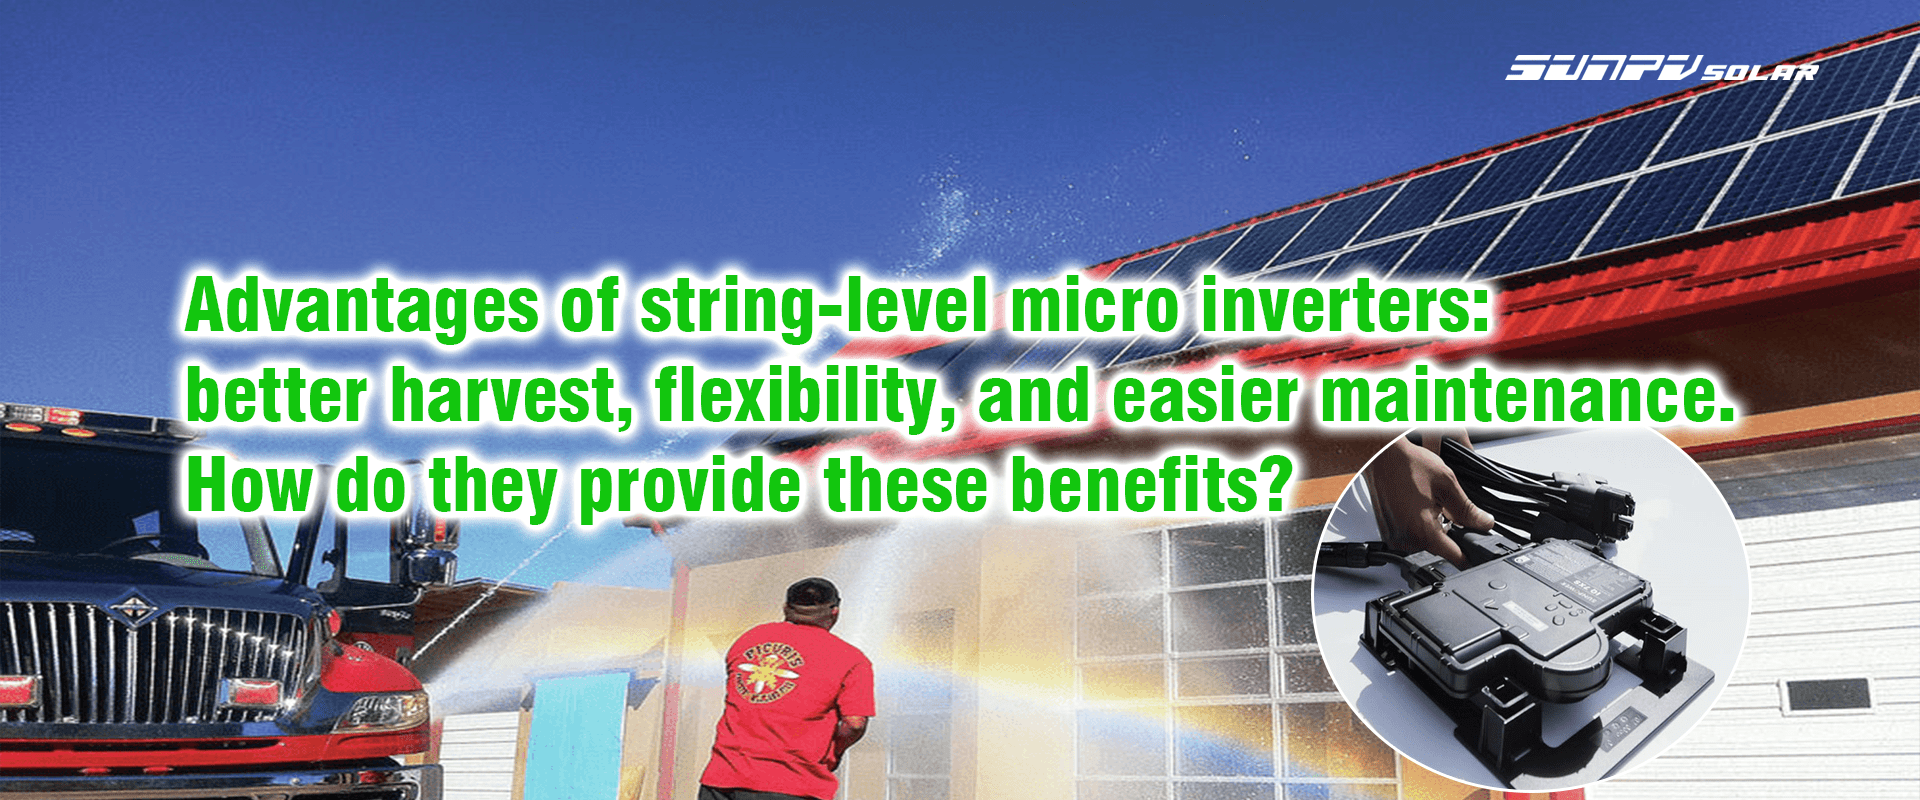 Advantages of string-level microinverters: better harvest, flexibility, and easier maintenance. How do they provide these benefits?